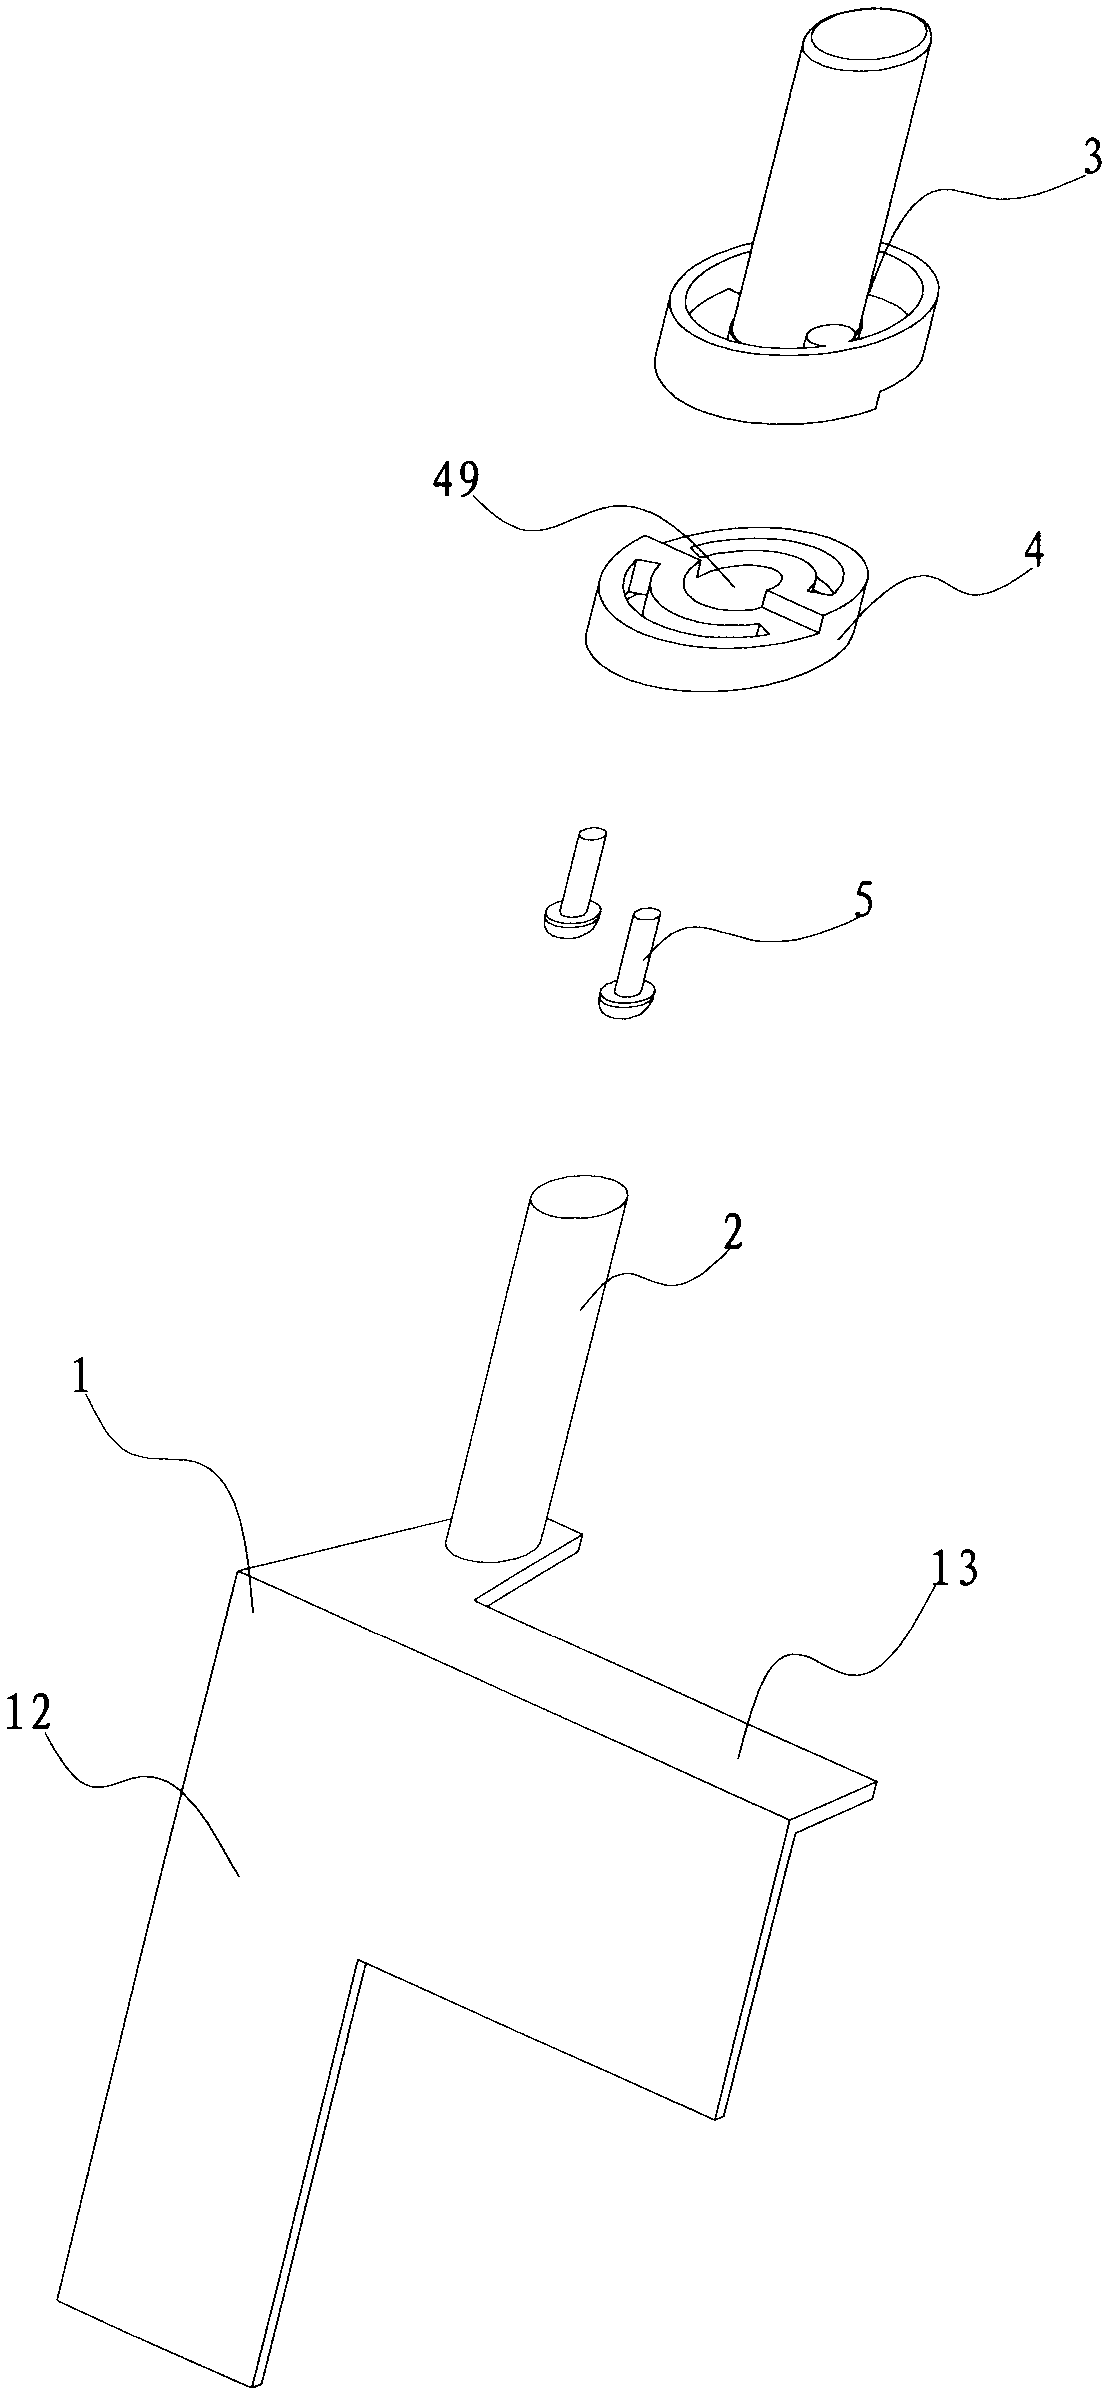 Hinge fitting and refrigerator with same